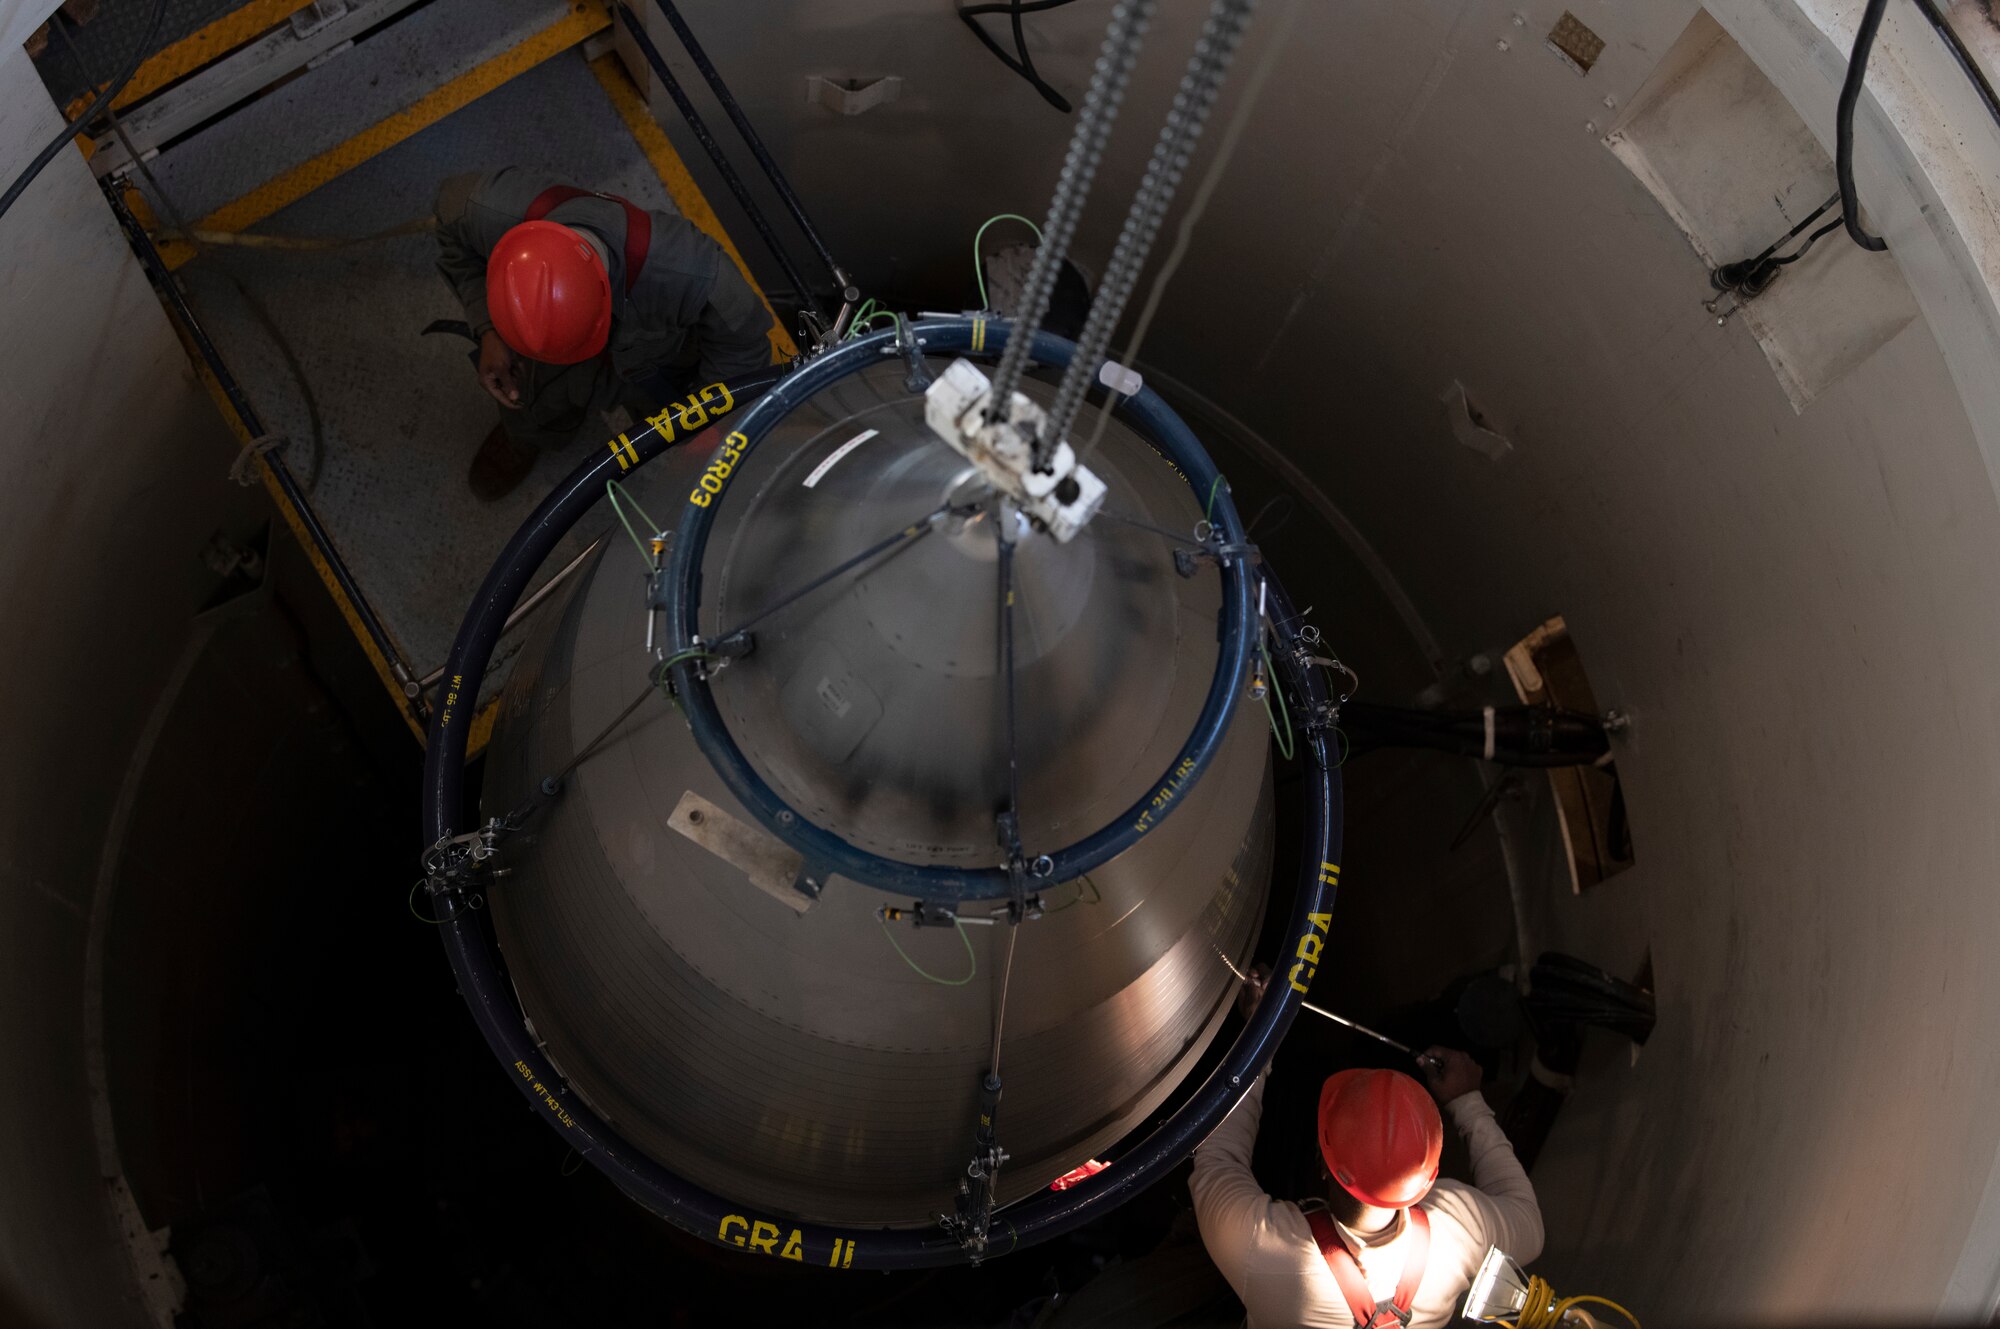 Airmen from the 90th Maintenance Group are responsible for maintaining and repairing ICBMs on alert status Dec. 18, 2019, within the F.E. Warren missile complex, as they are one of three missile bases part of Air Force Global Strike Command. The Minuteman III, on alert at all three bases, replaced the Peacekeeper at F.E. Warren in the 1970s. (U.S. Air Force photo by Senior Airman Abbigayle Williams)